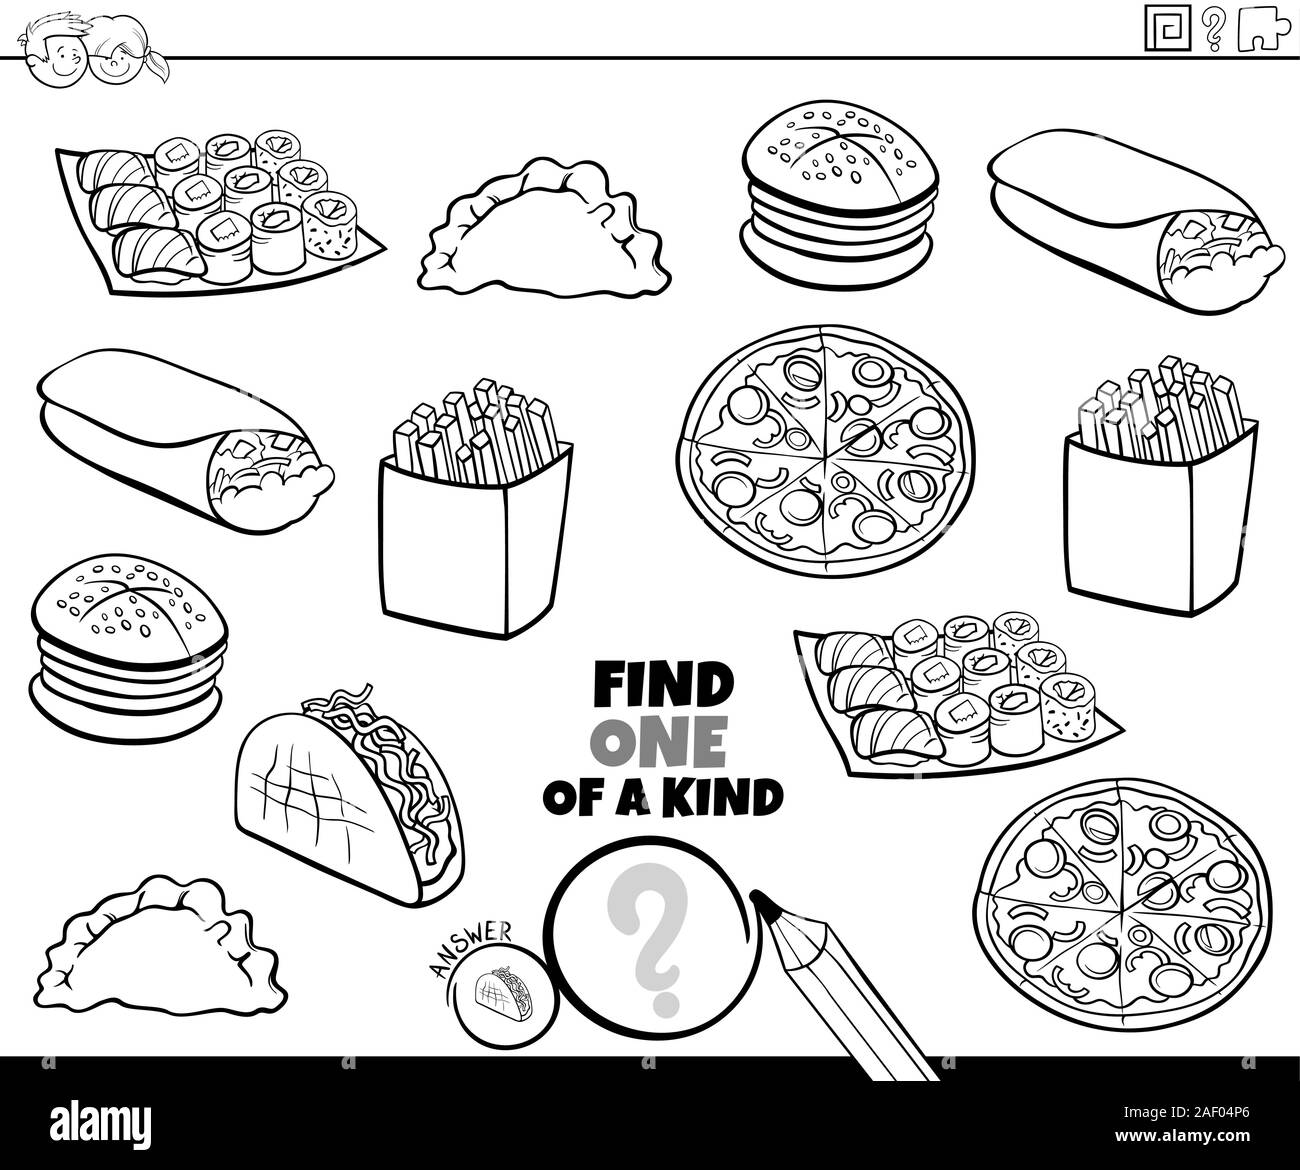 Black and White Cartoon Illustration of Find One of a Kind Picture Educational Game with Food Objects Coloring Book Page Stock Vector